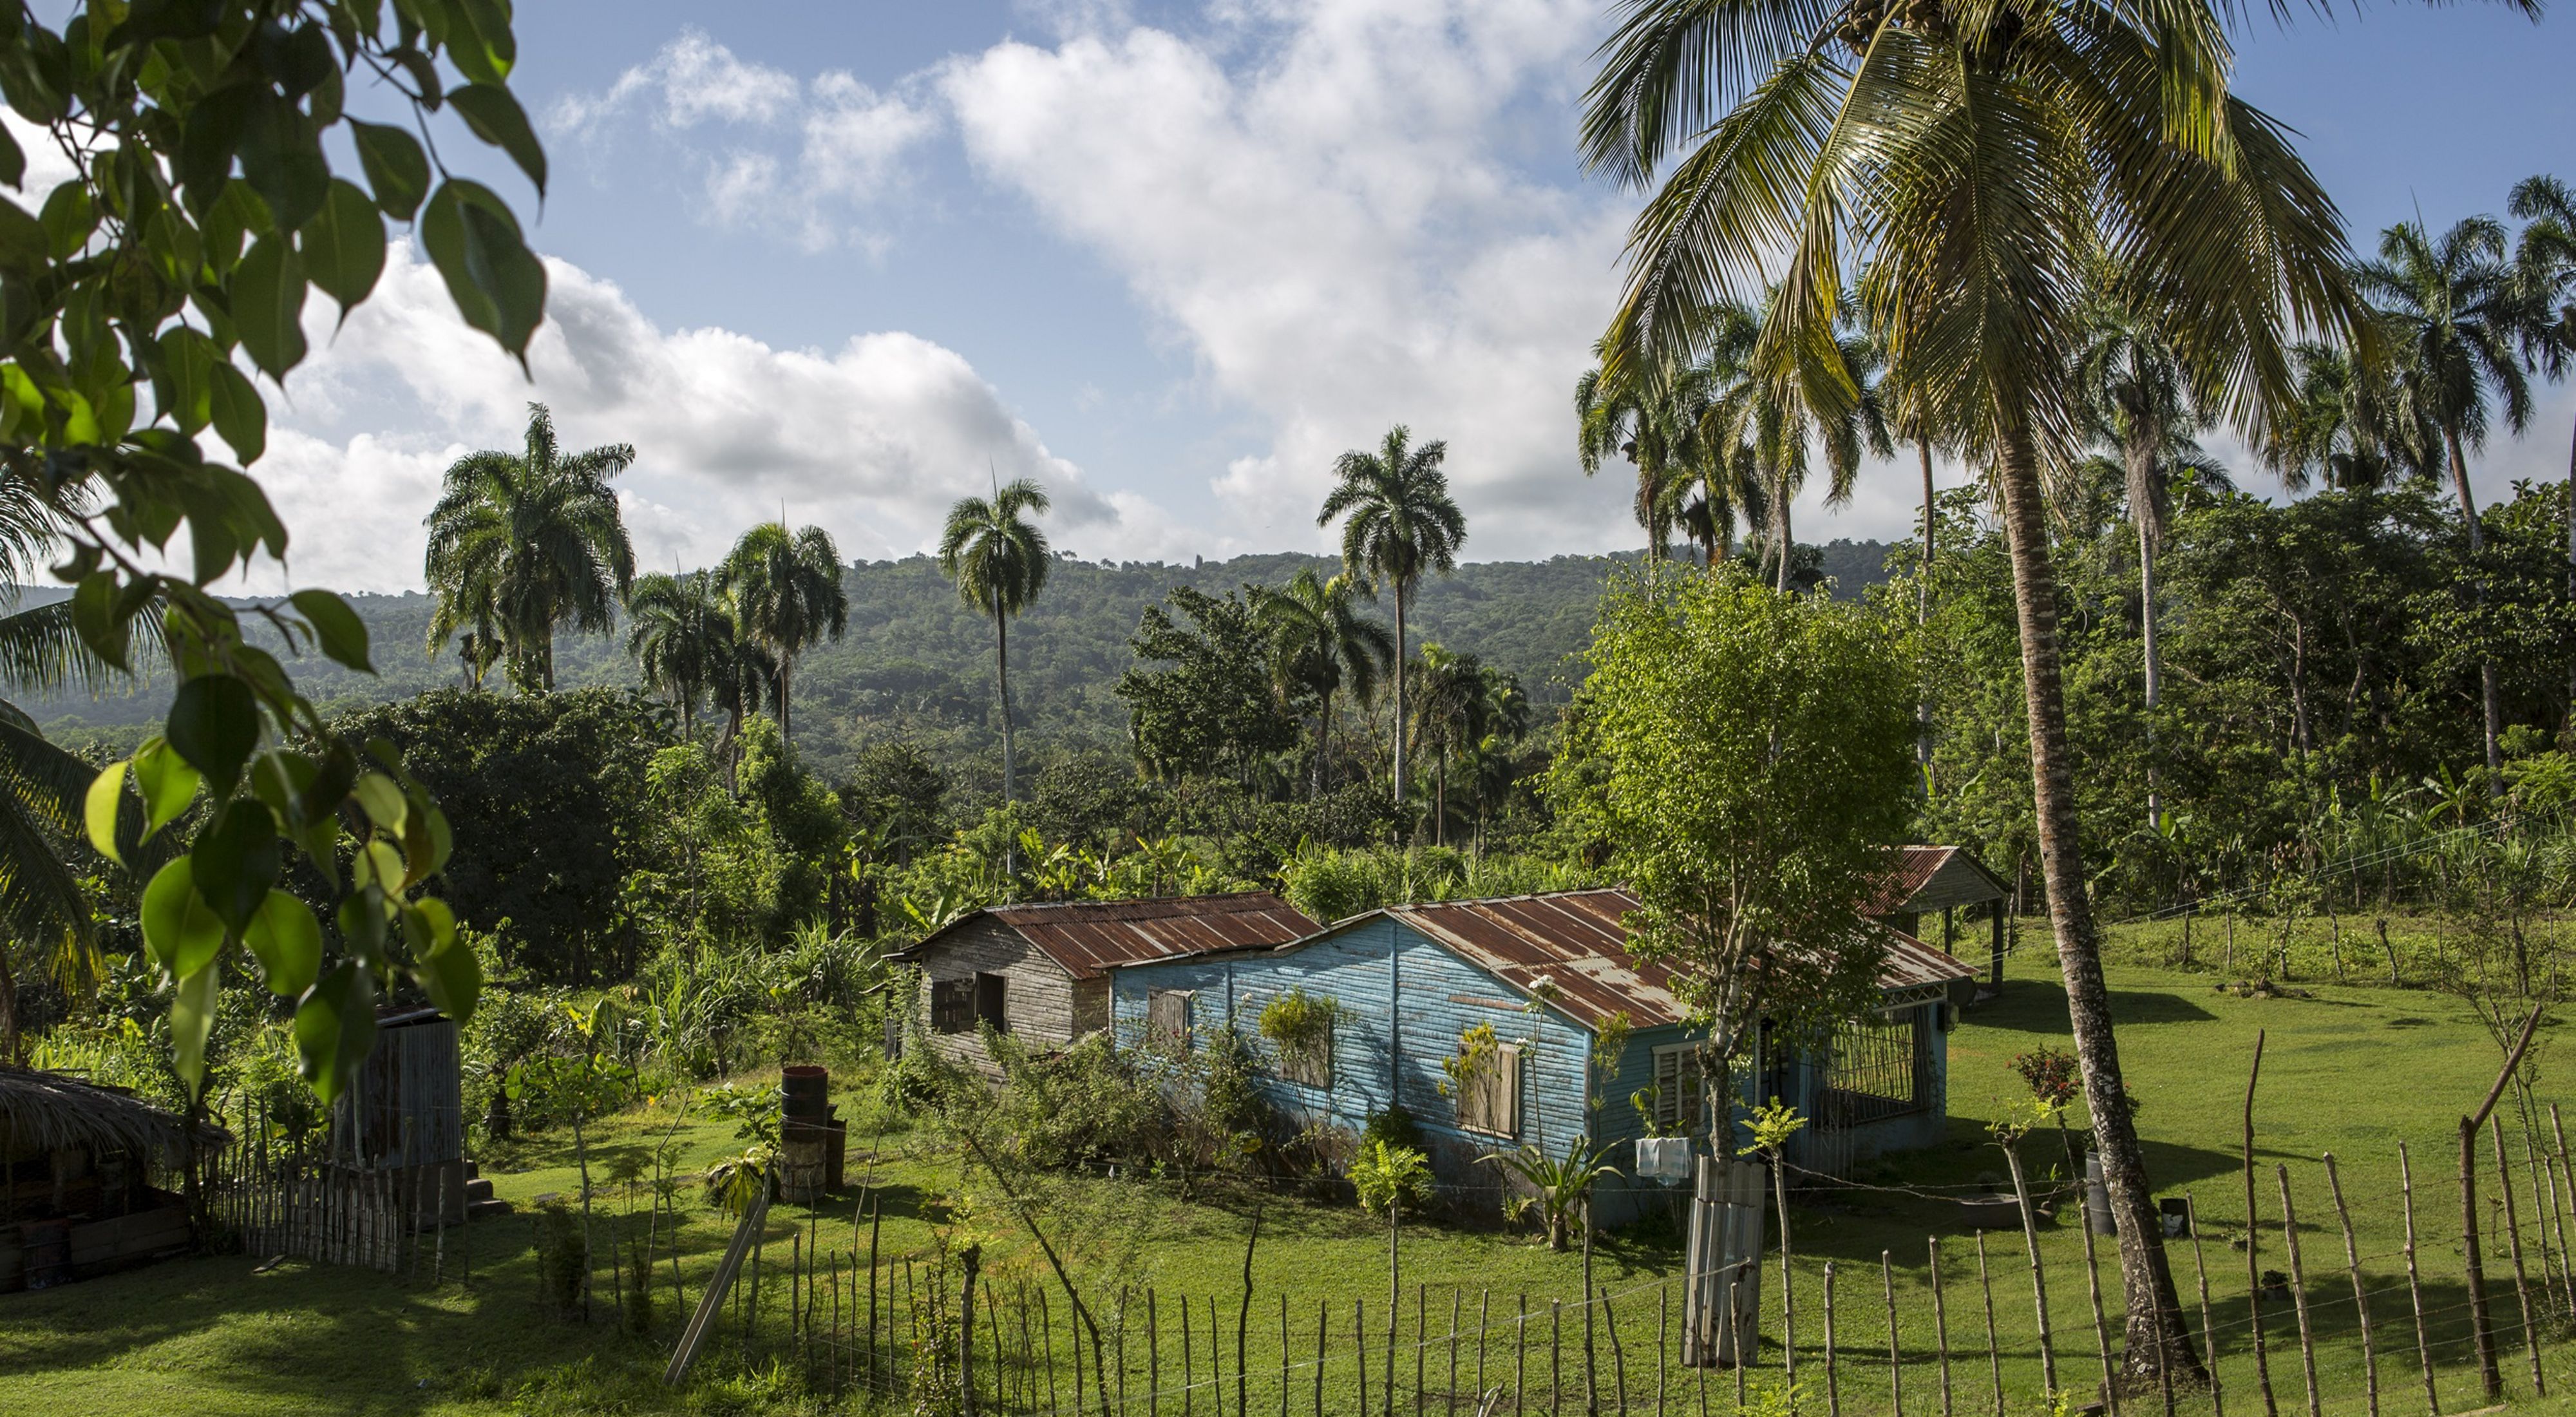 A farmhouse sits in the tropical countryside.